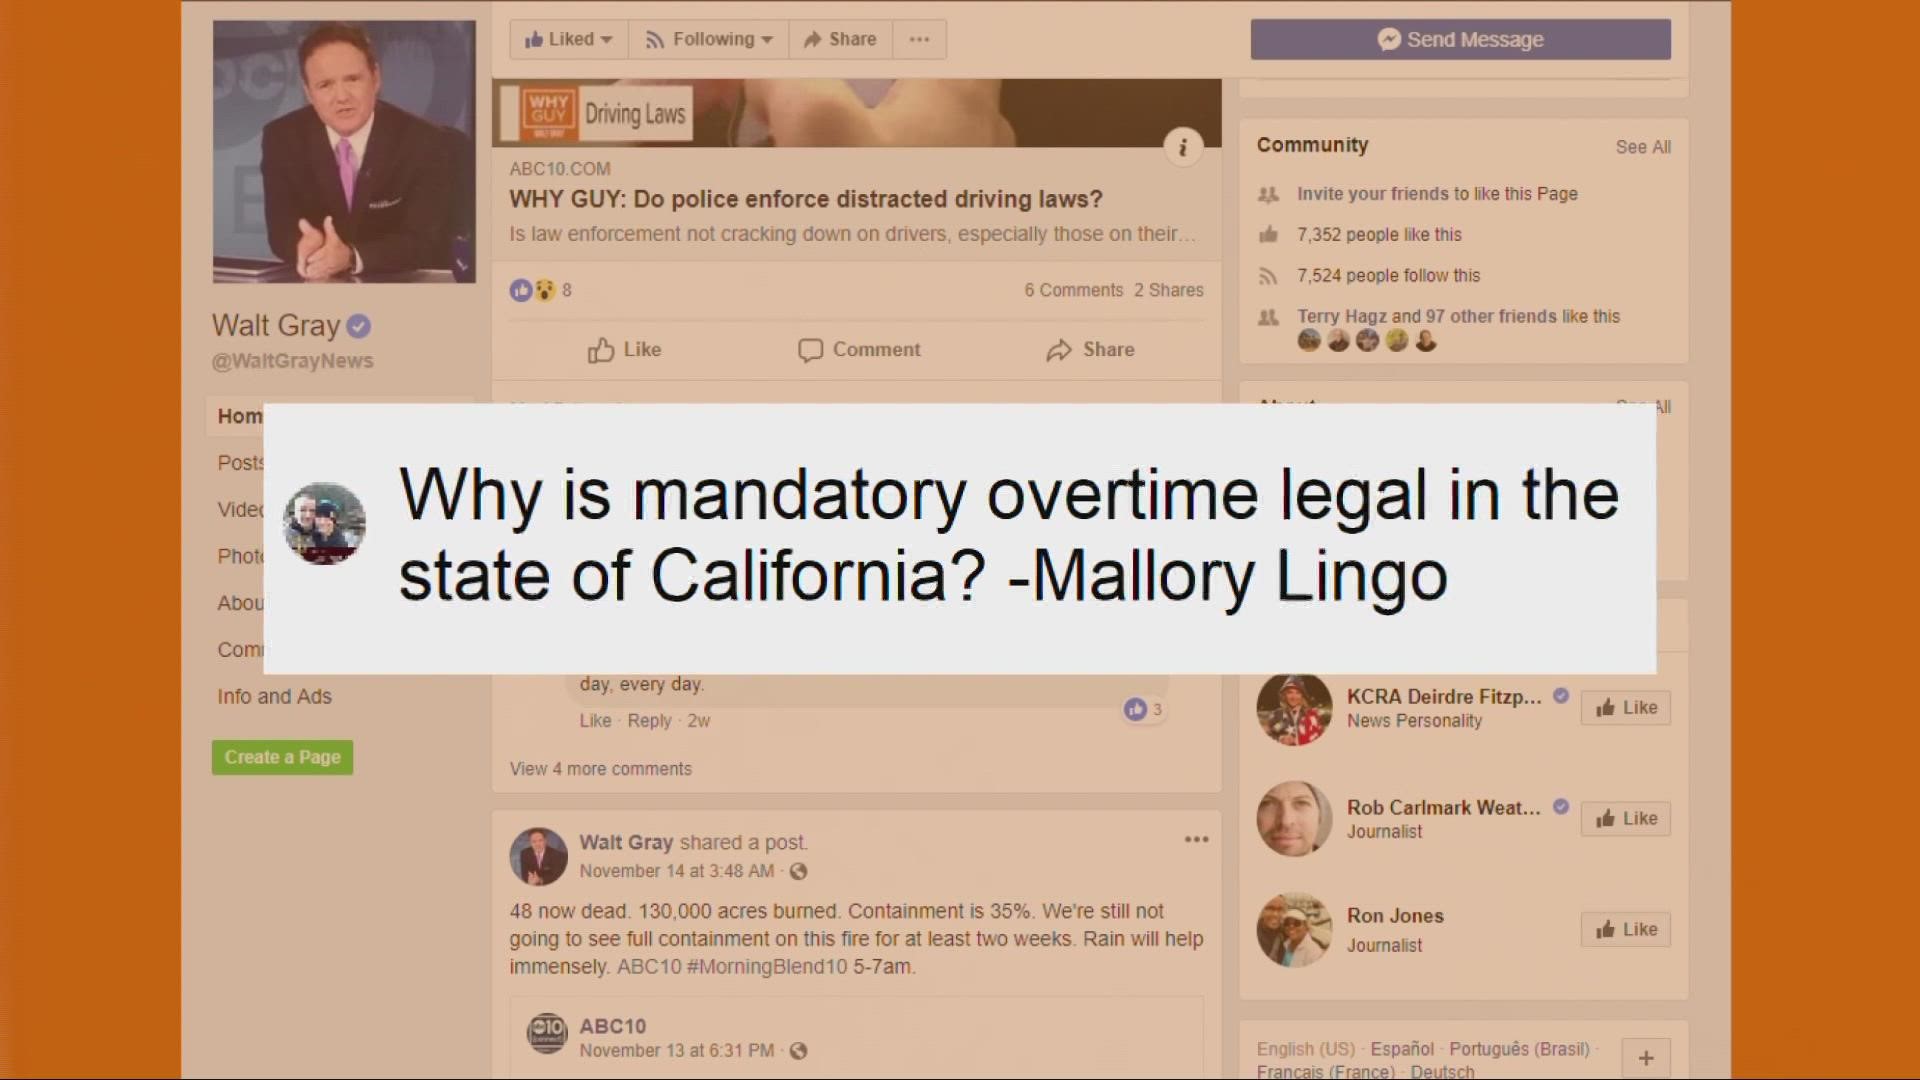 Why is mandatory overtime legal in the state of California?